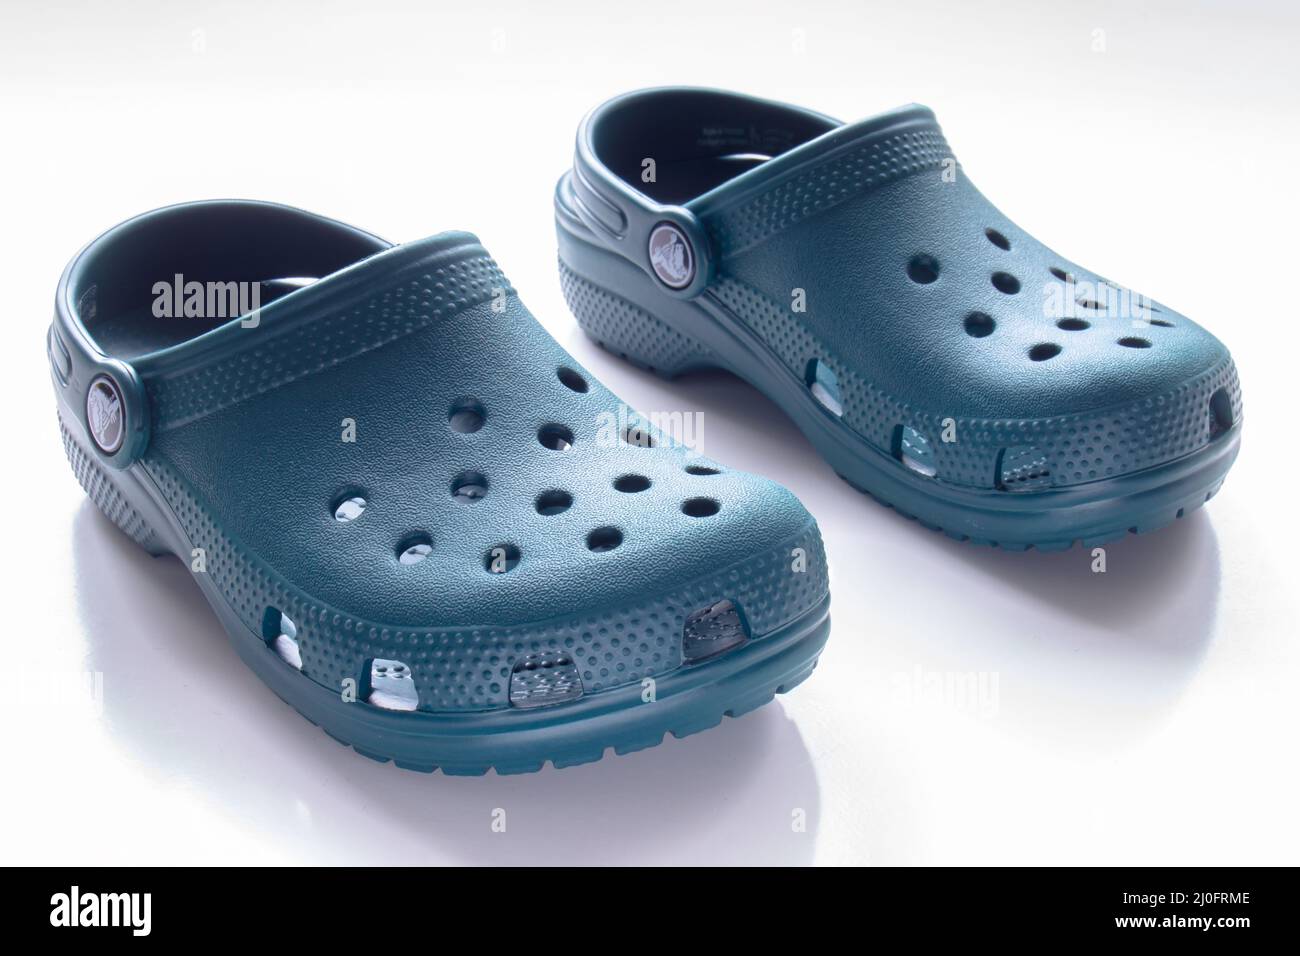 Calgary, Alberta, Canada. Nov. 19, 2020. Front View of Blue Crocs footwear,  foam clog shoes on a white background Stock Photo - Alamy